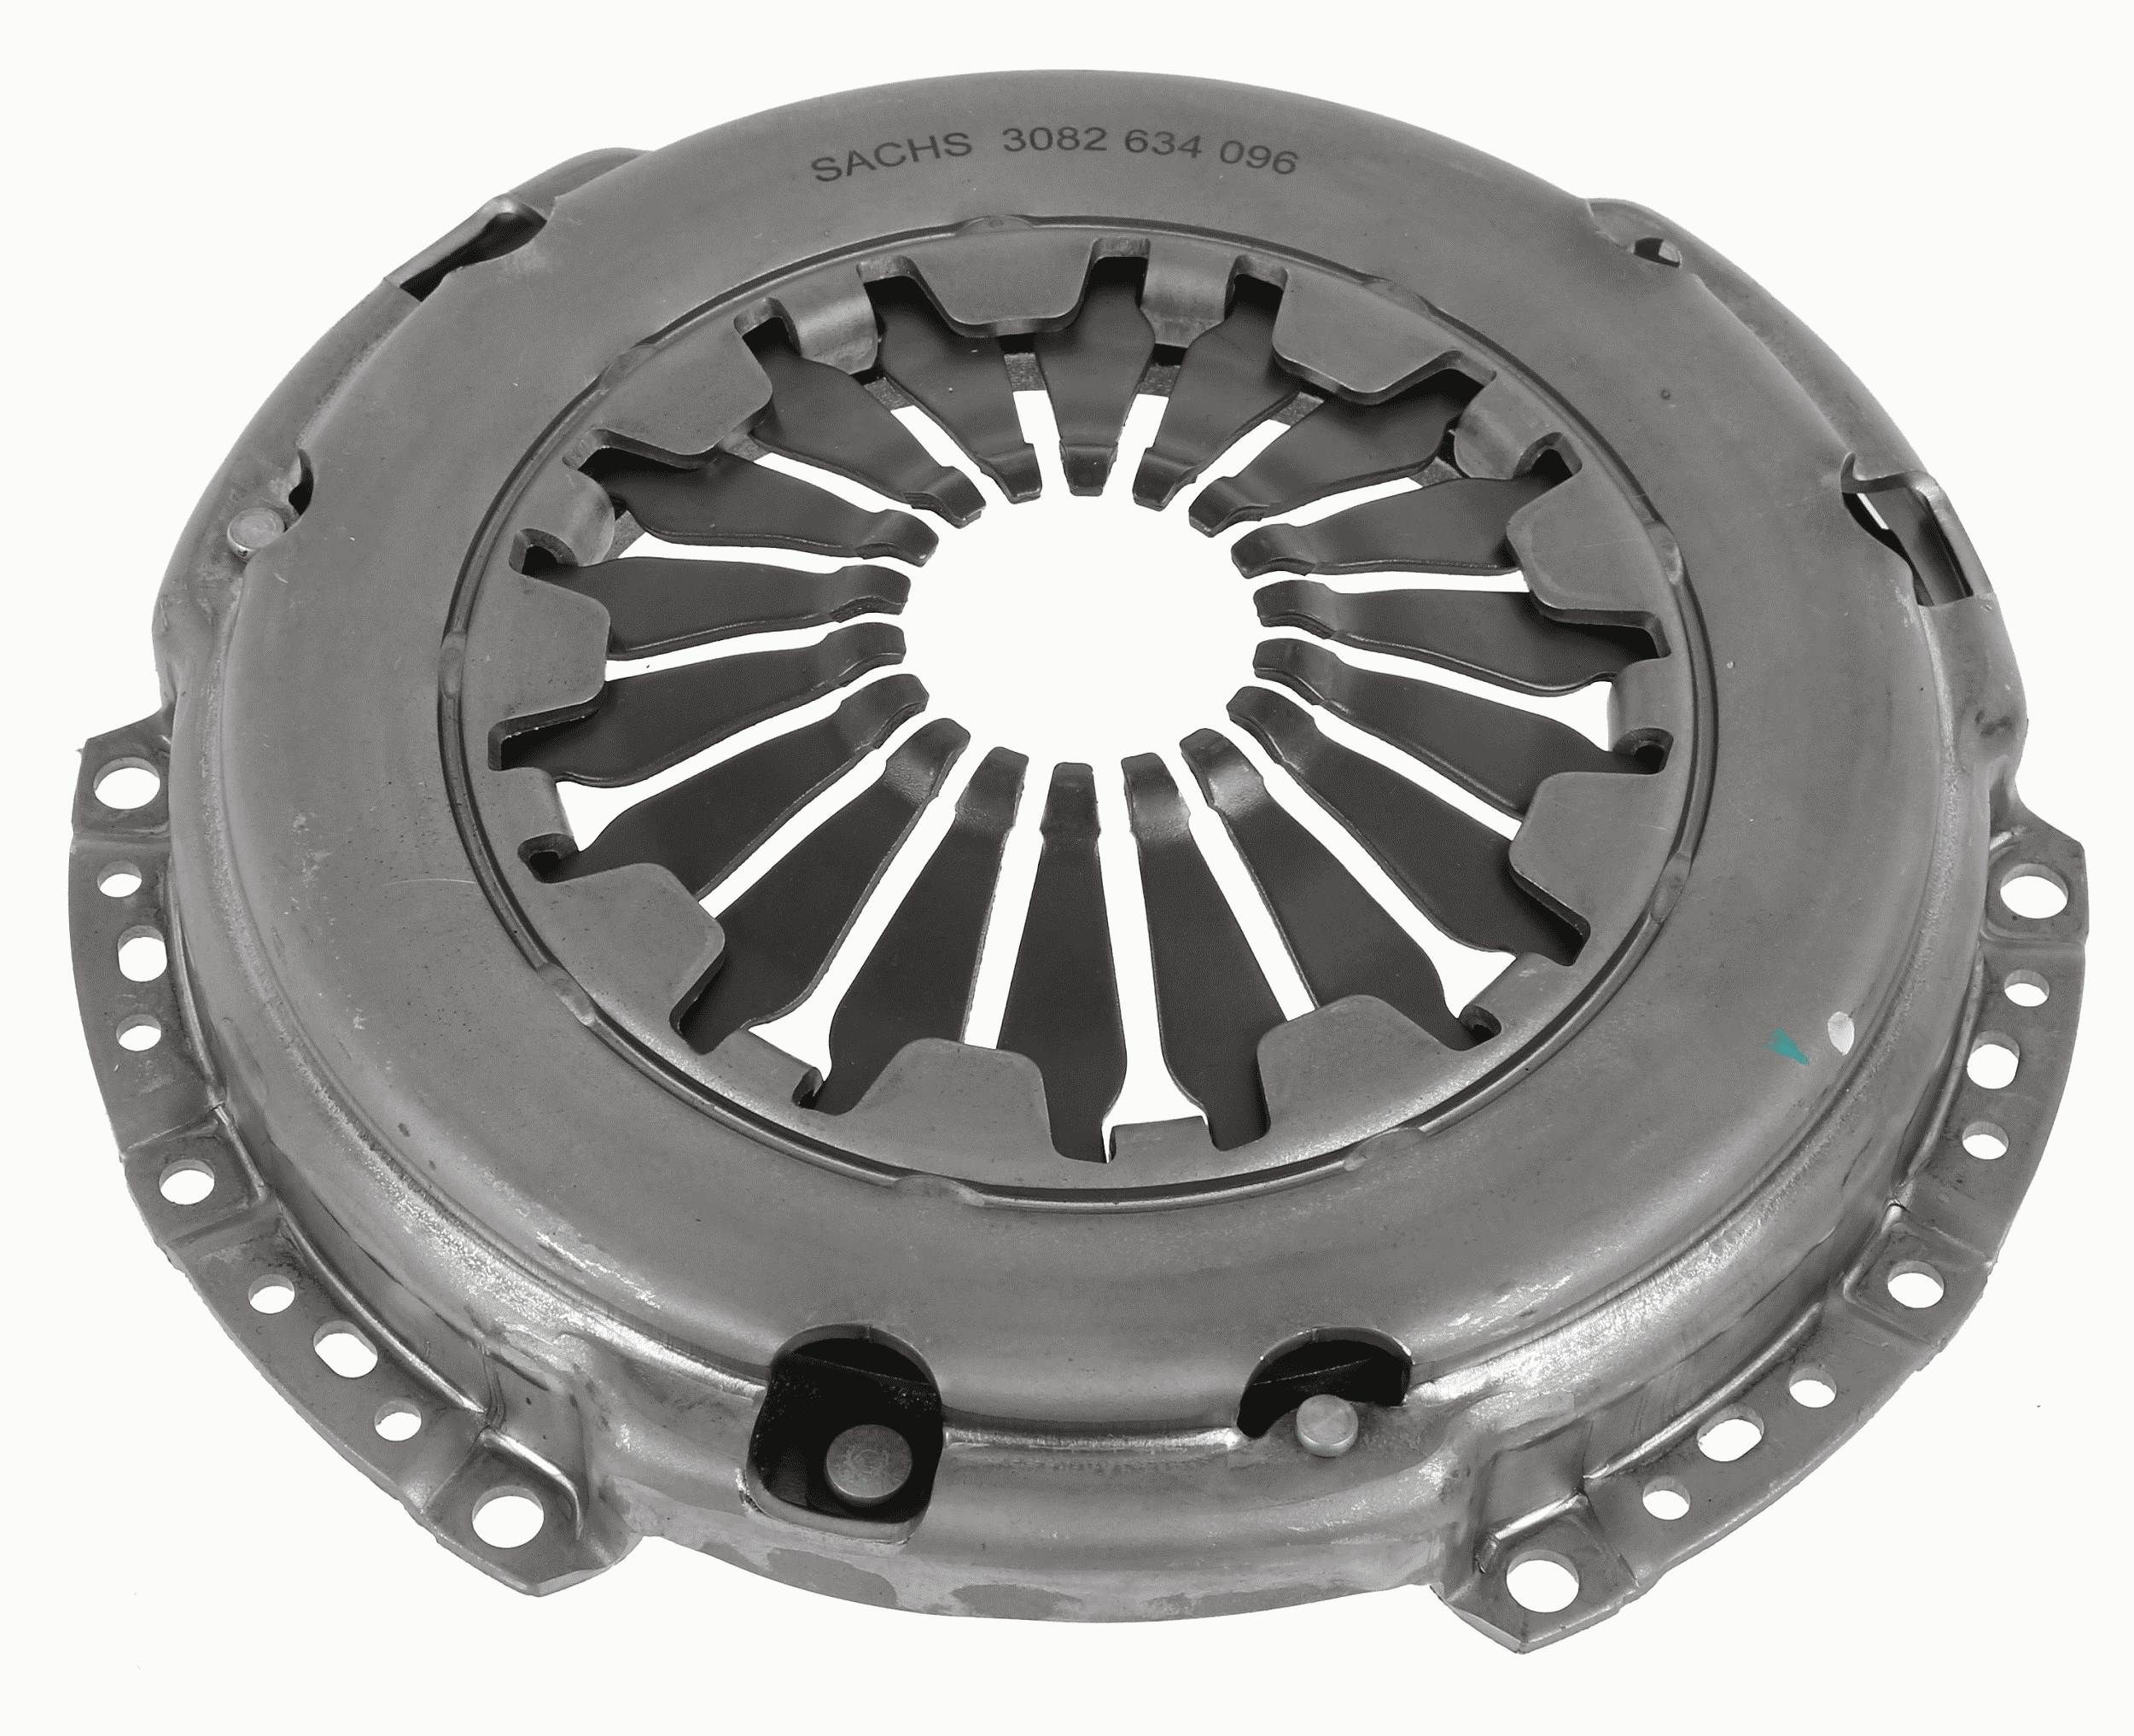 Audi A4 Clutch cover plate 19335557 SACHS 3082 634 096 online buy